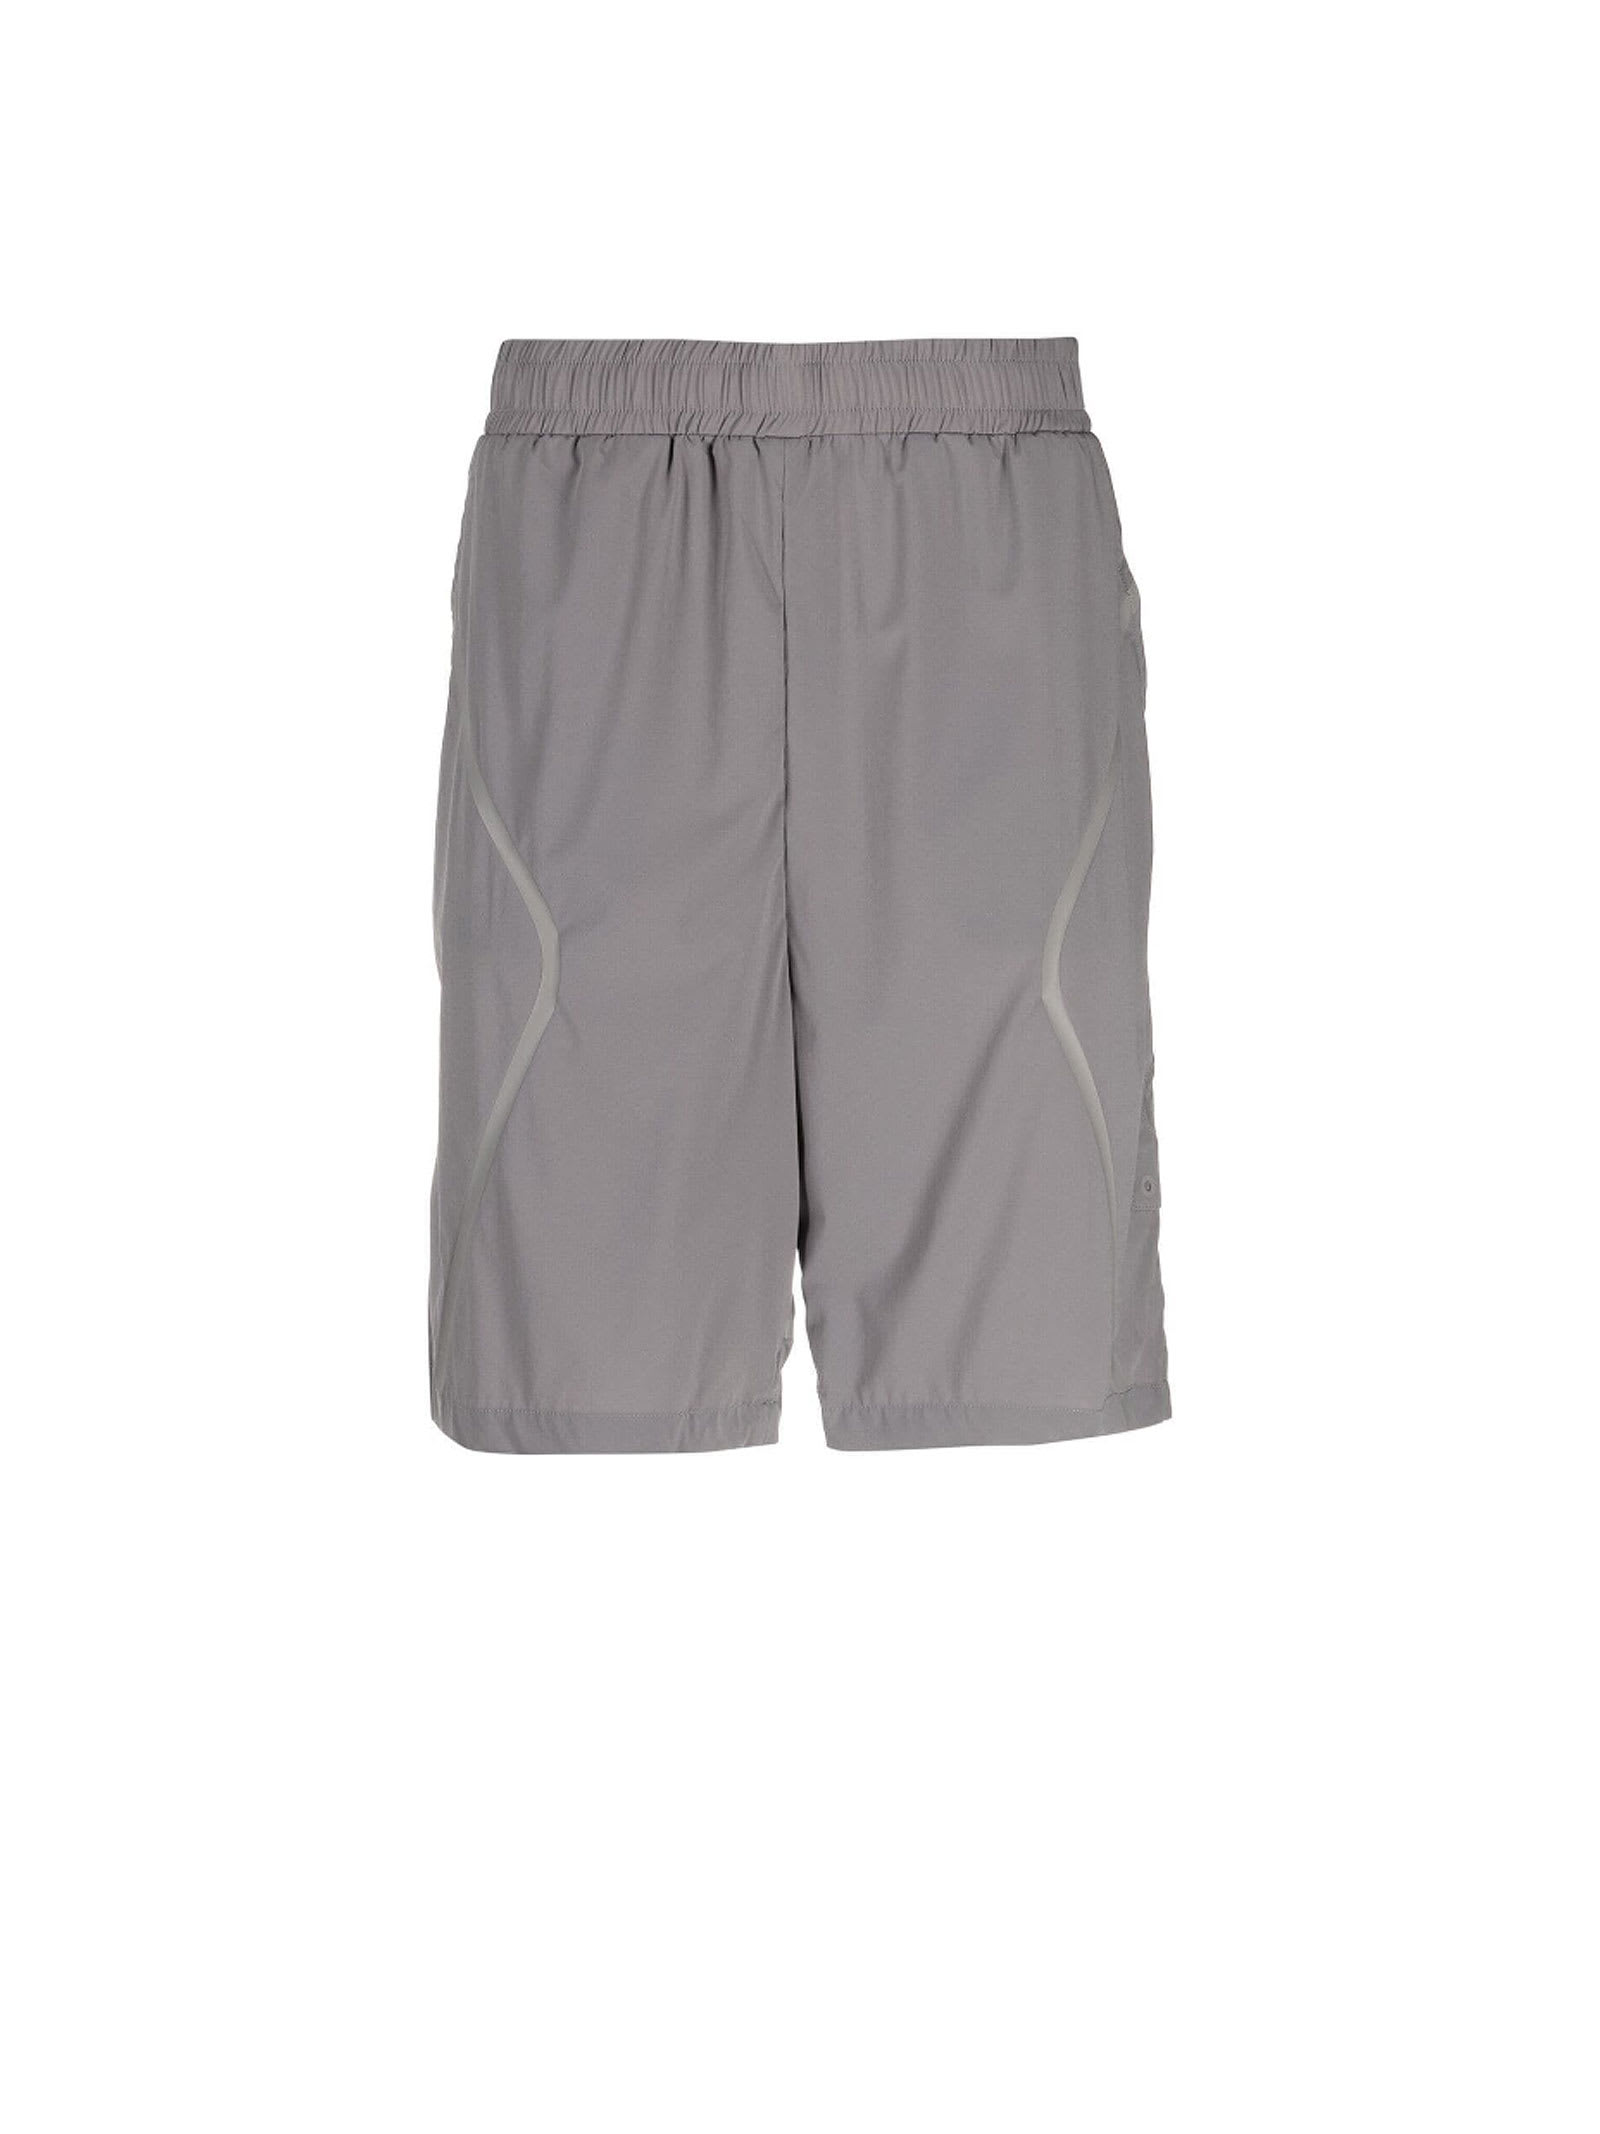 A-COLD-WALL Shorts In Grey Nylon